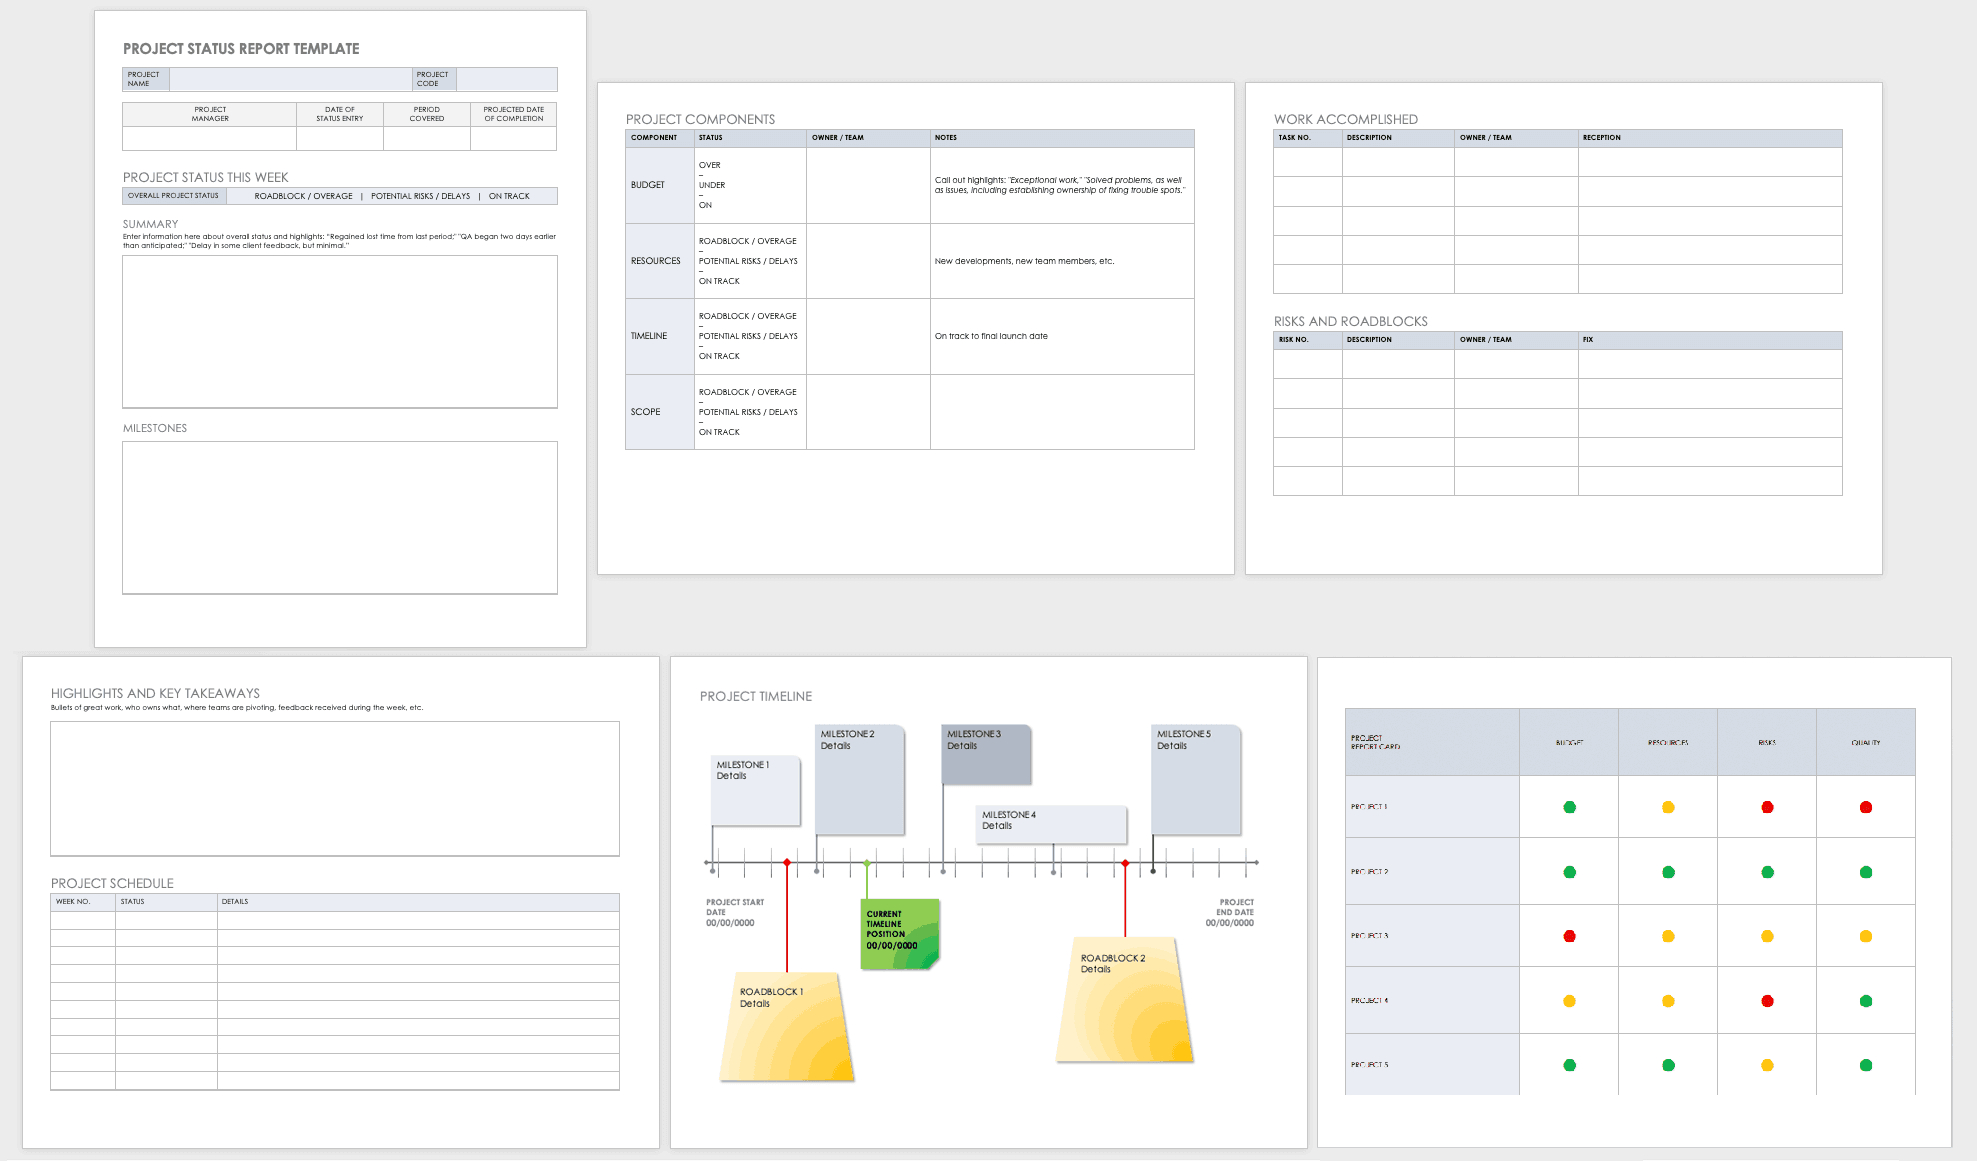 Free Project Report Templates | Smartsheet Within Executive Summary Project Status Report Template